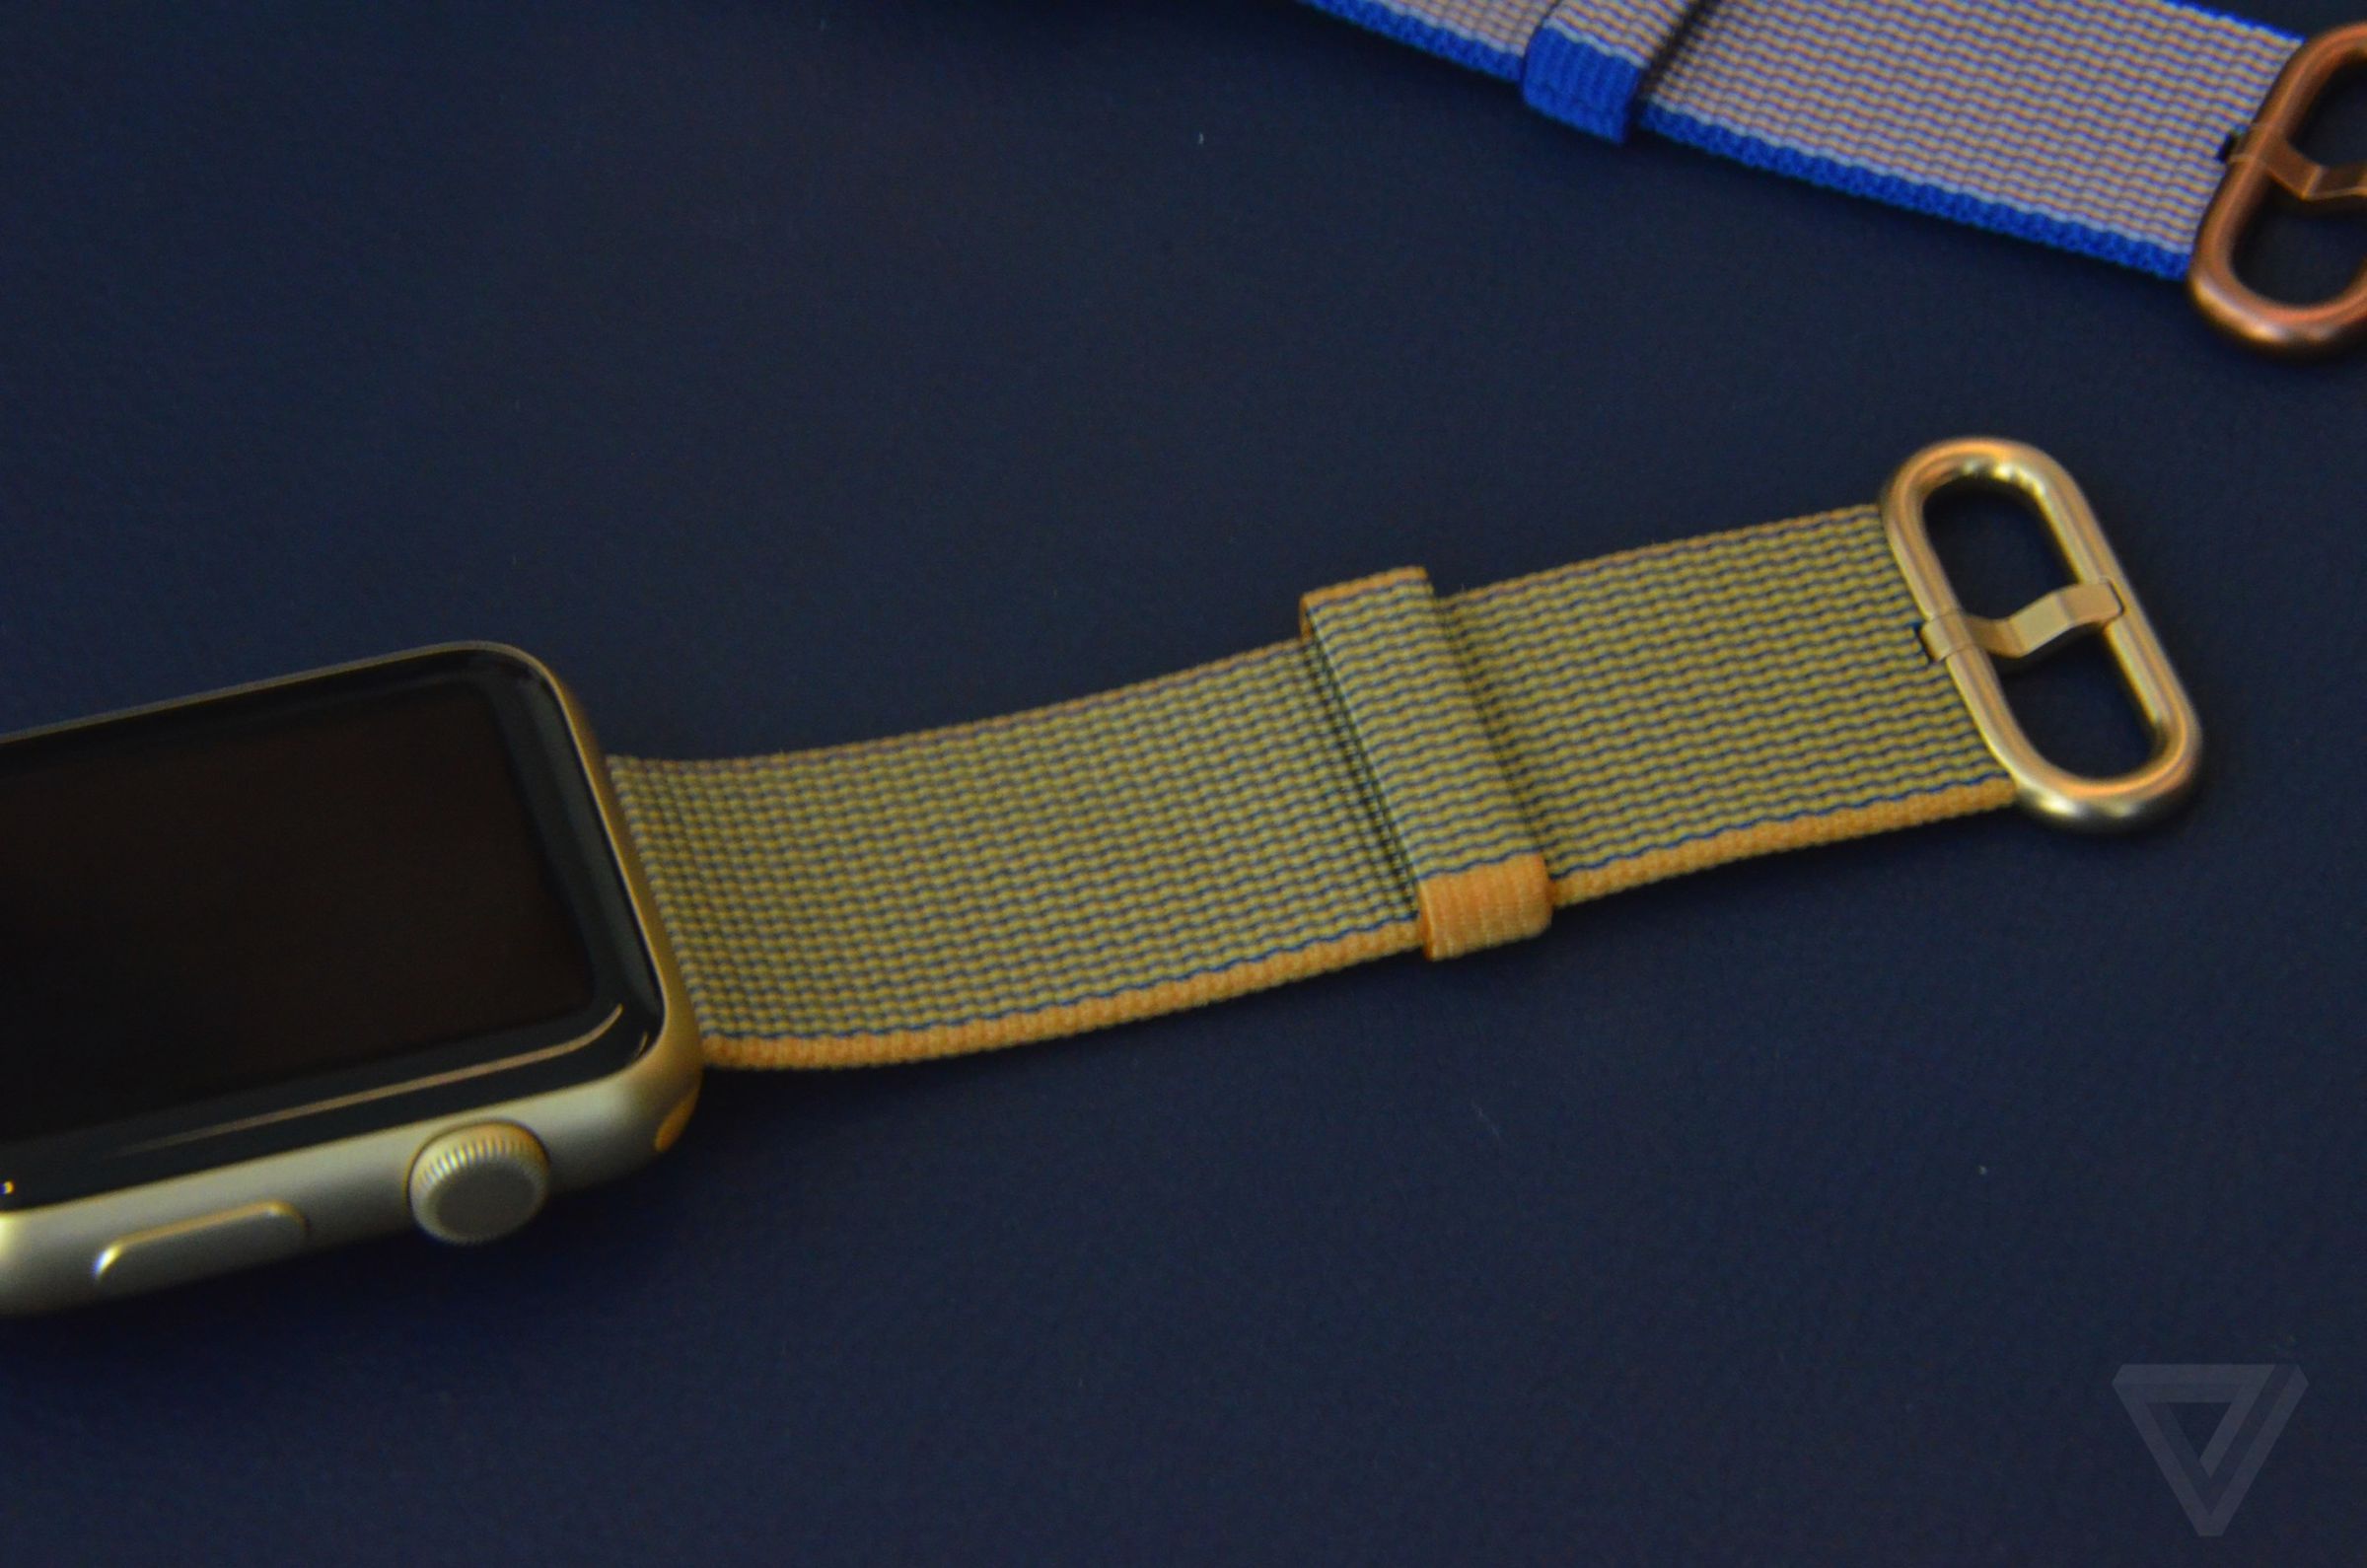 Photos of new Apple Watch Bands